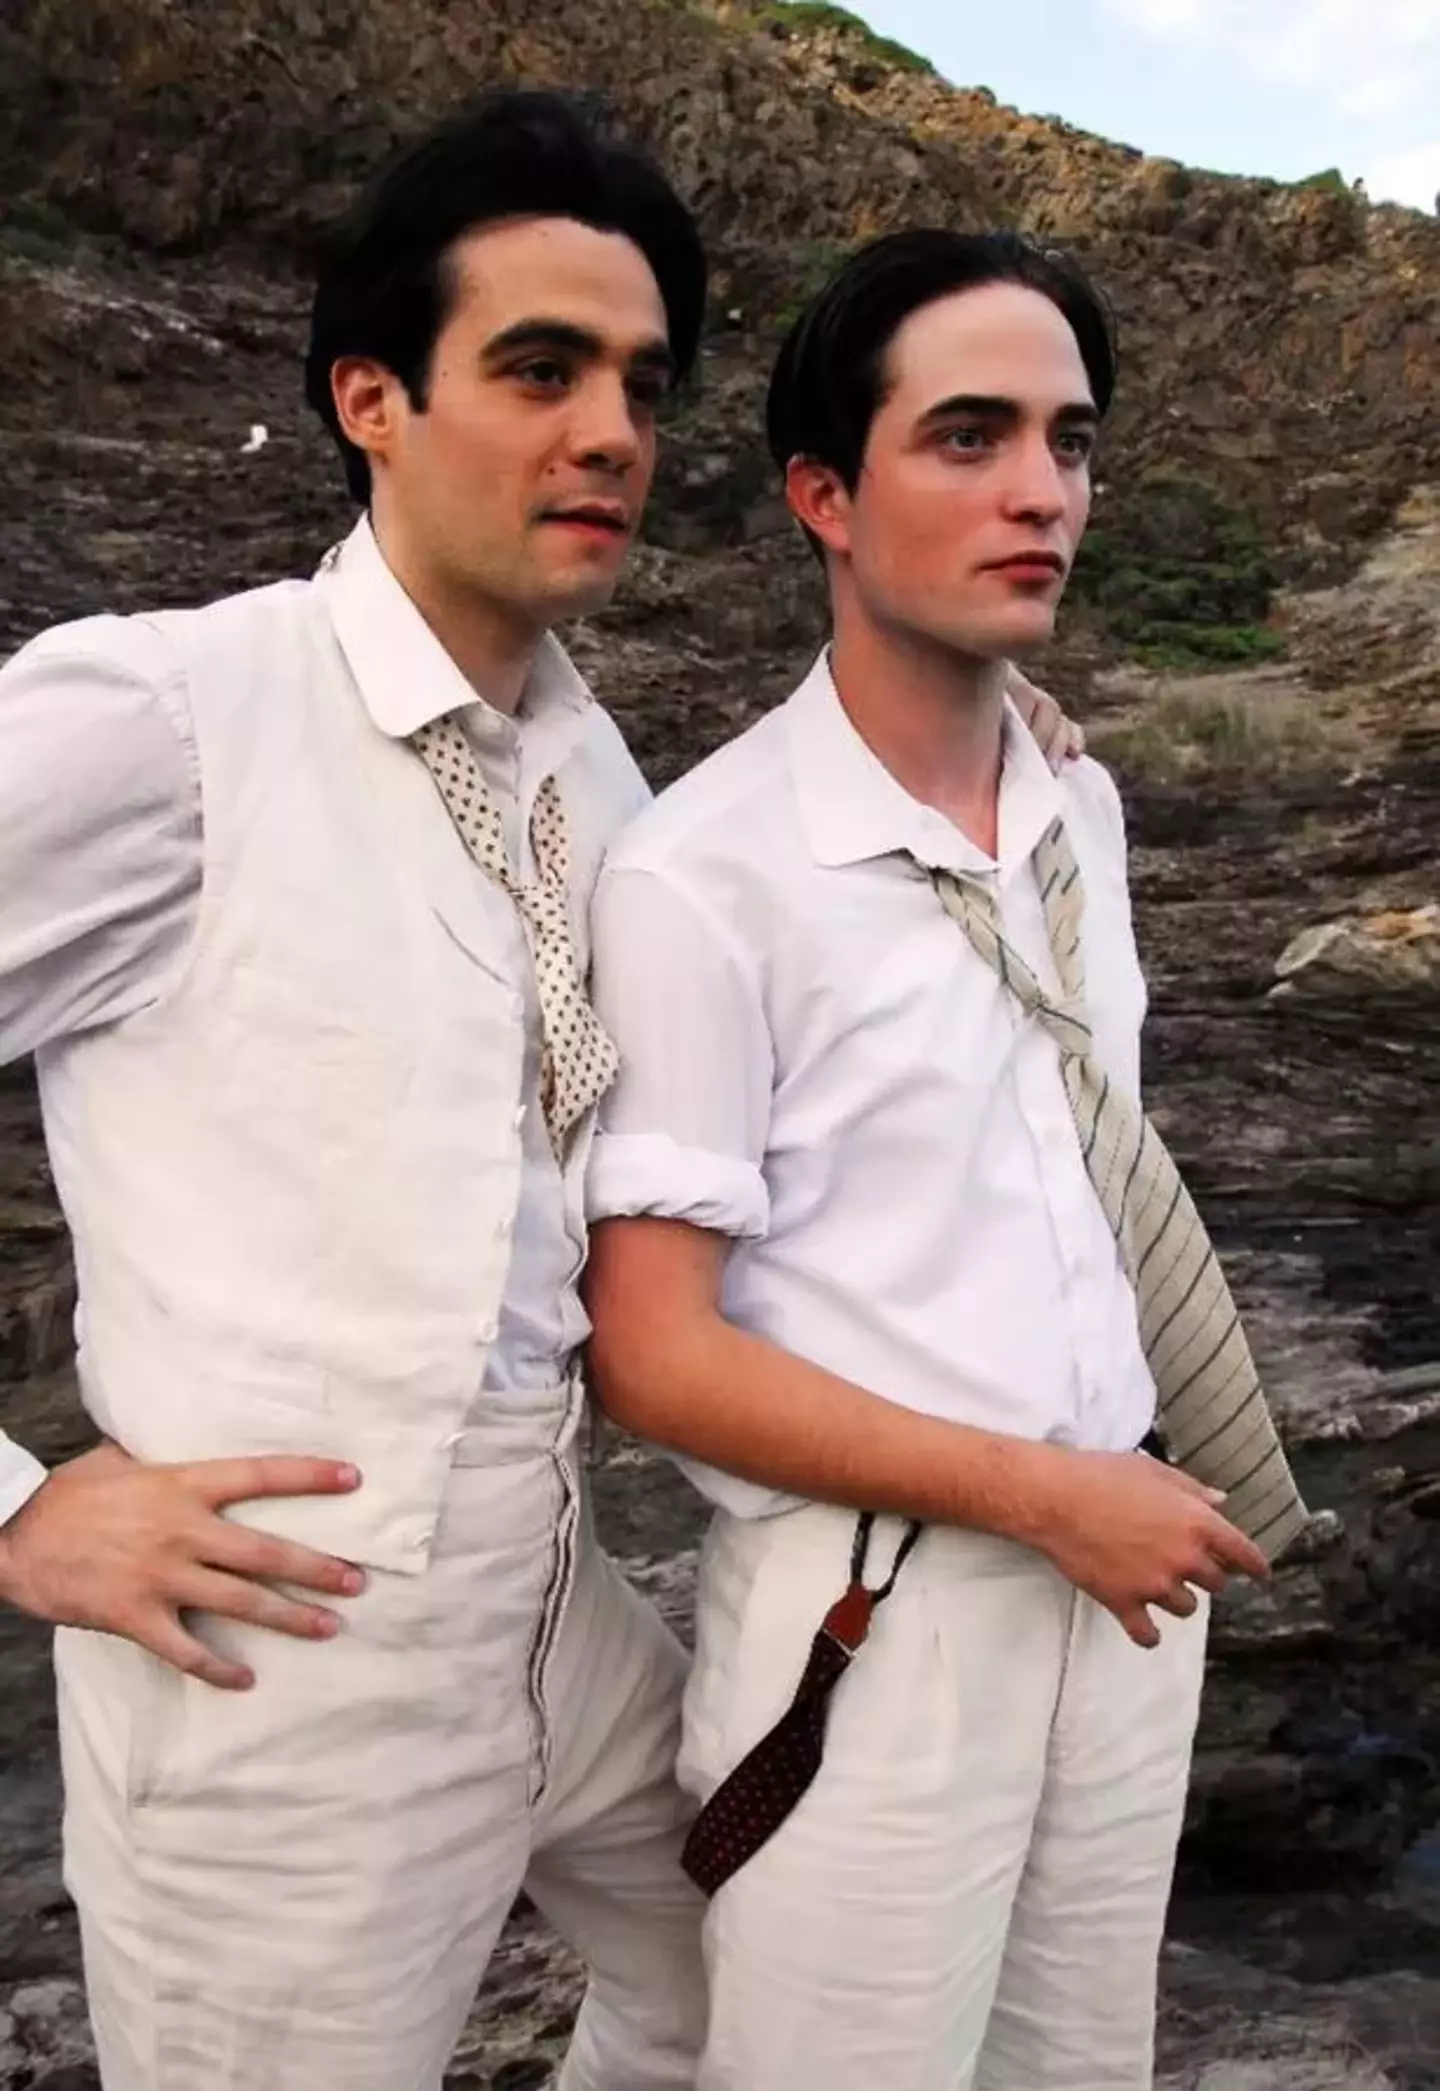 Pattinson played Salvador Dali in Little Ashes.